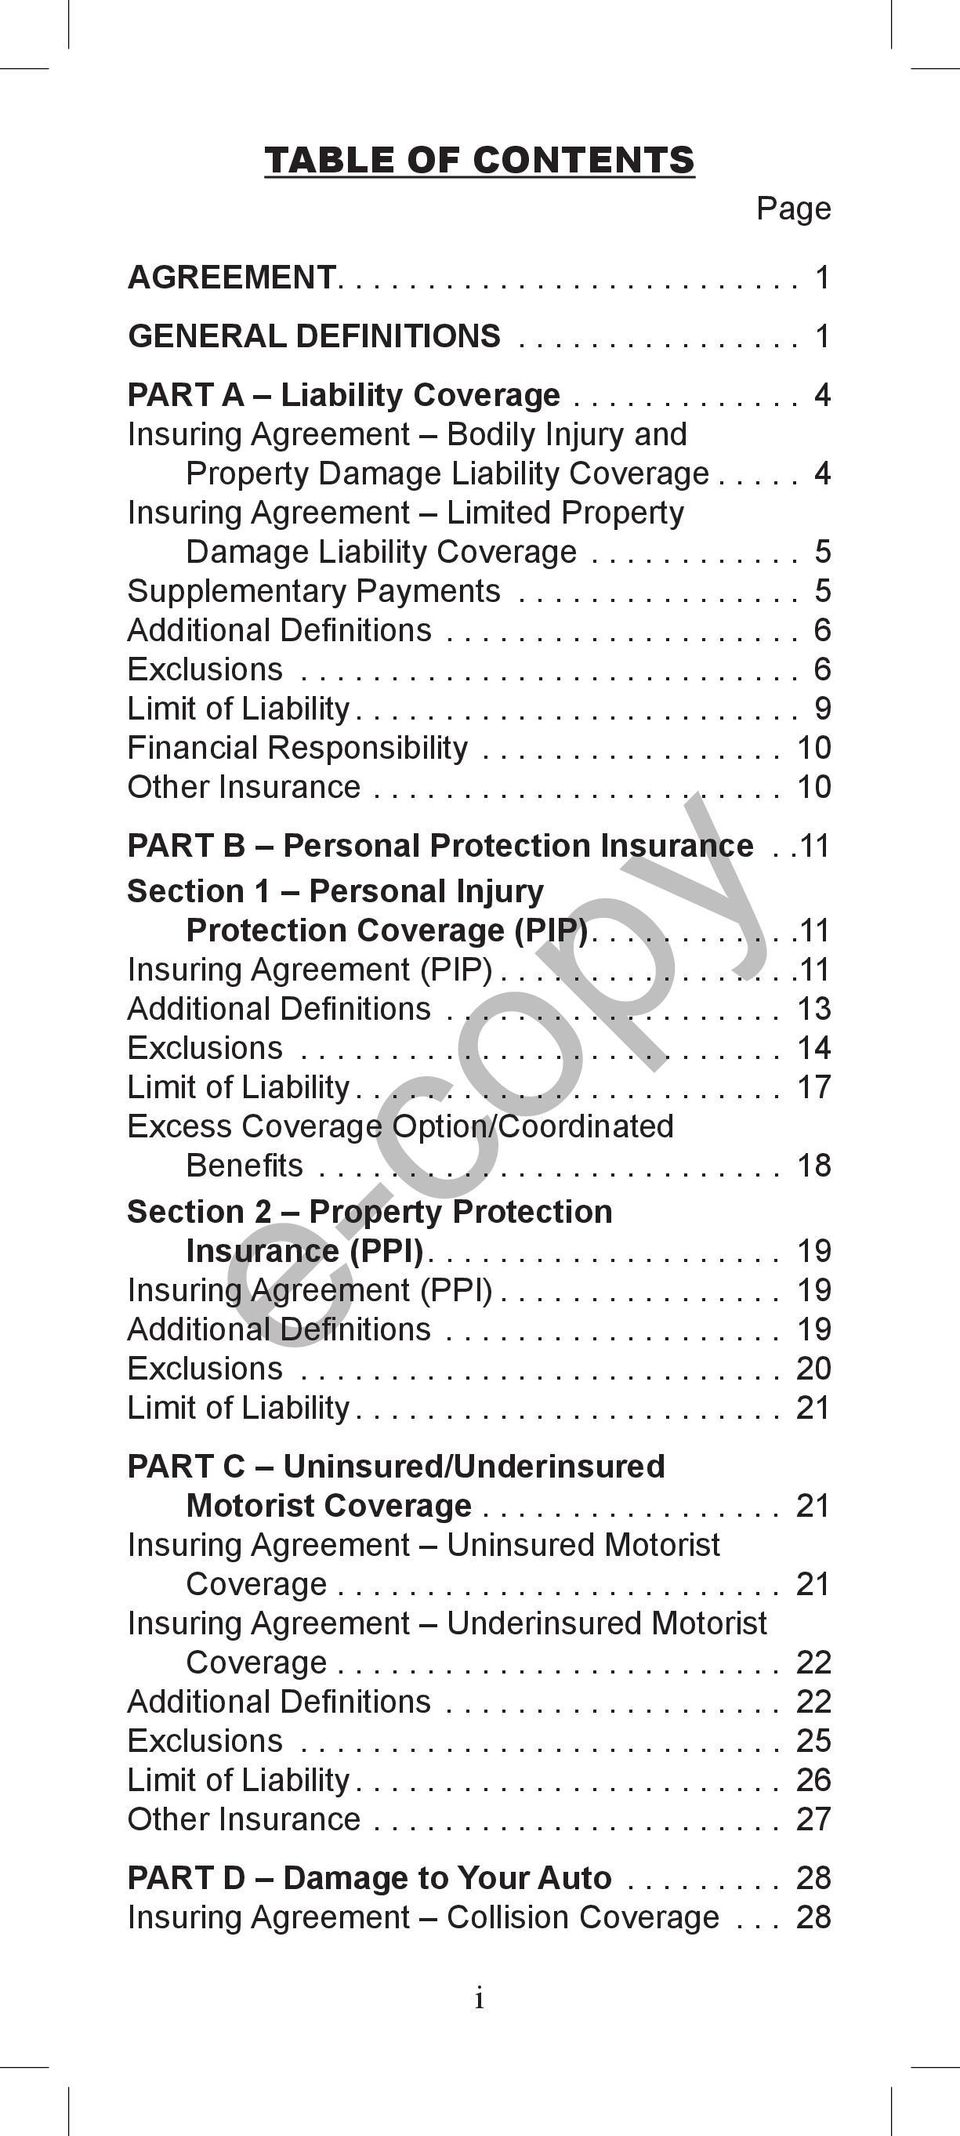 ........................... 6 Limit of Liability......................... 9 Financial Responsibility................. 10 Other Insurance....................... 10 PART B Personal Protection Insurance.